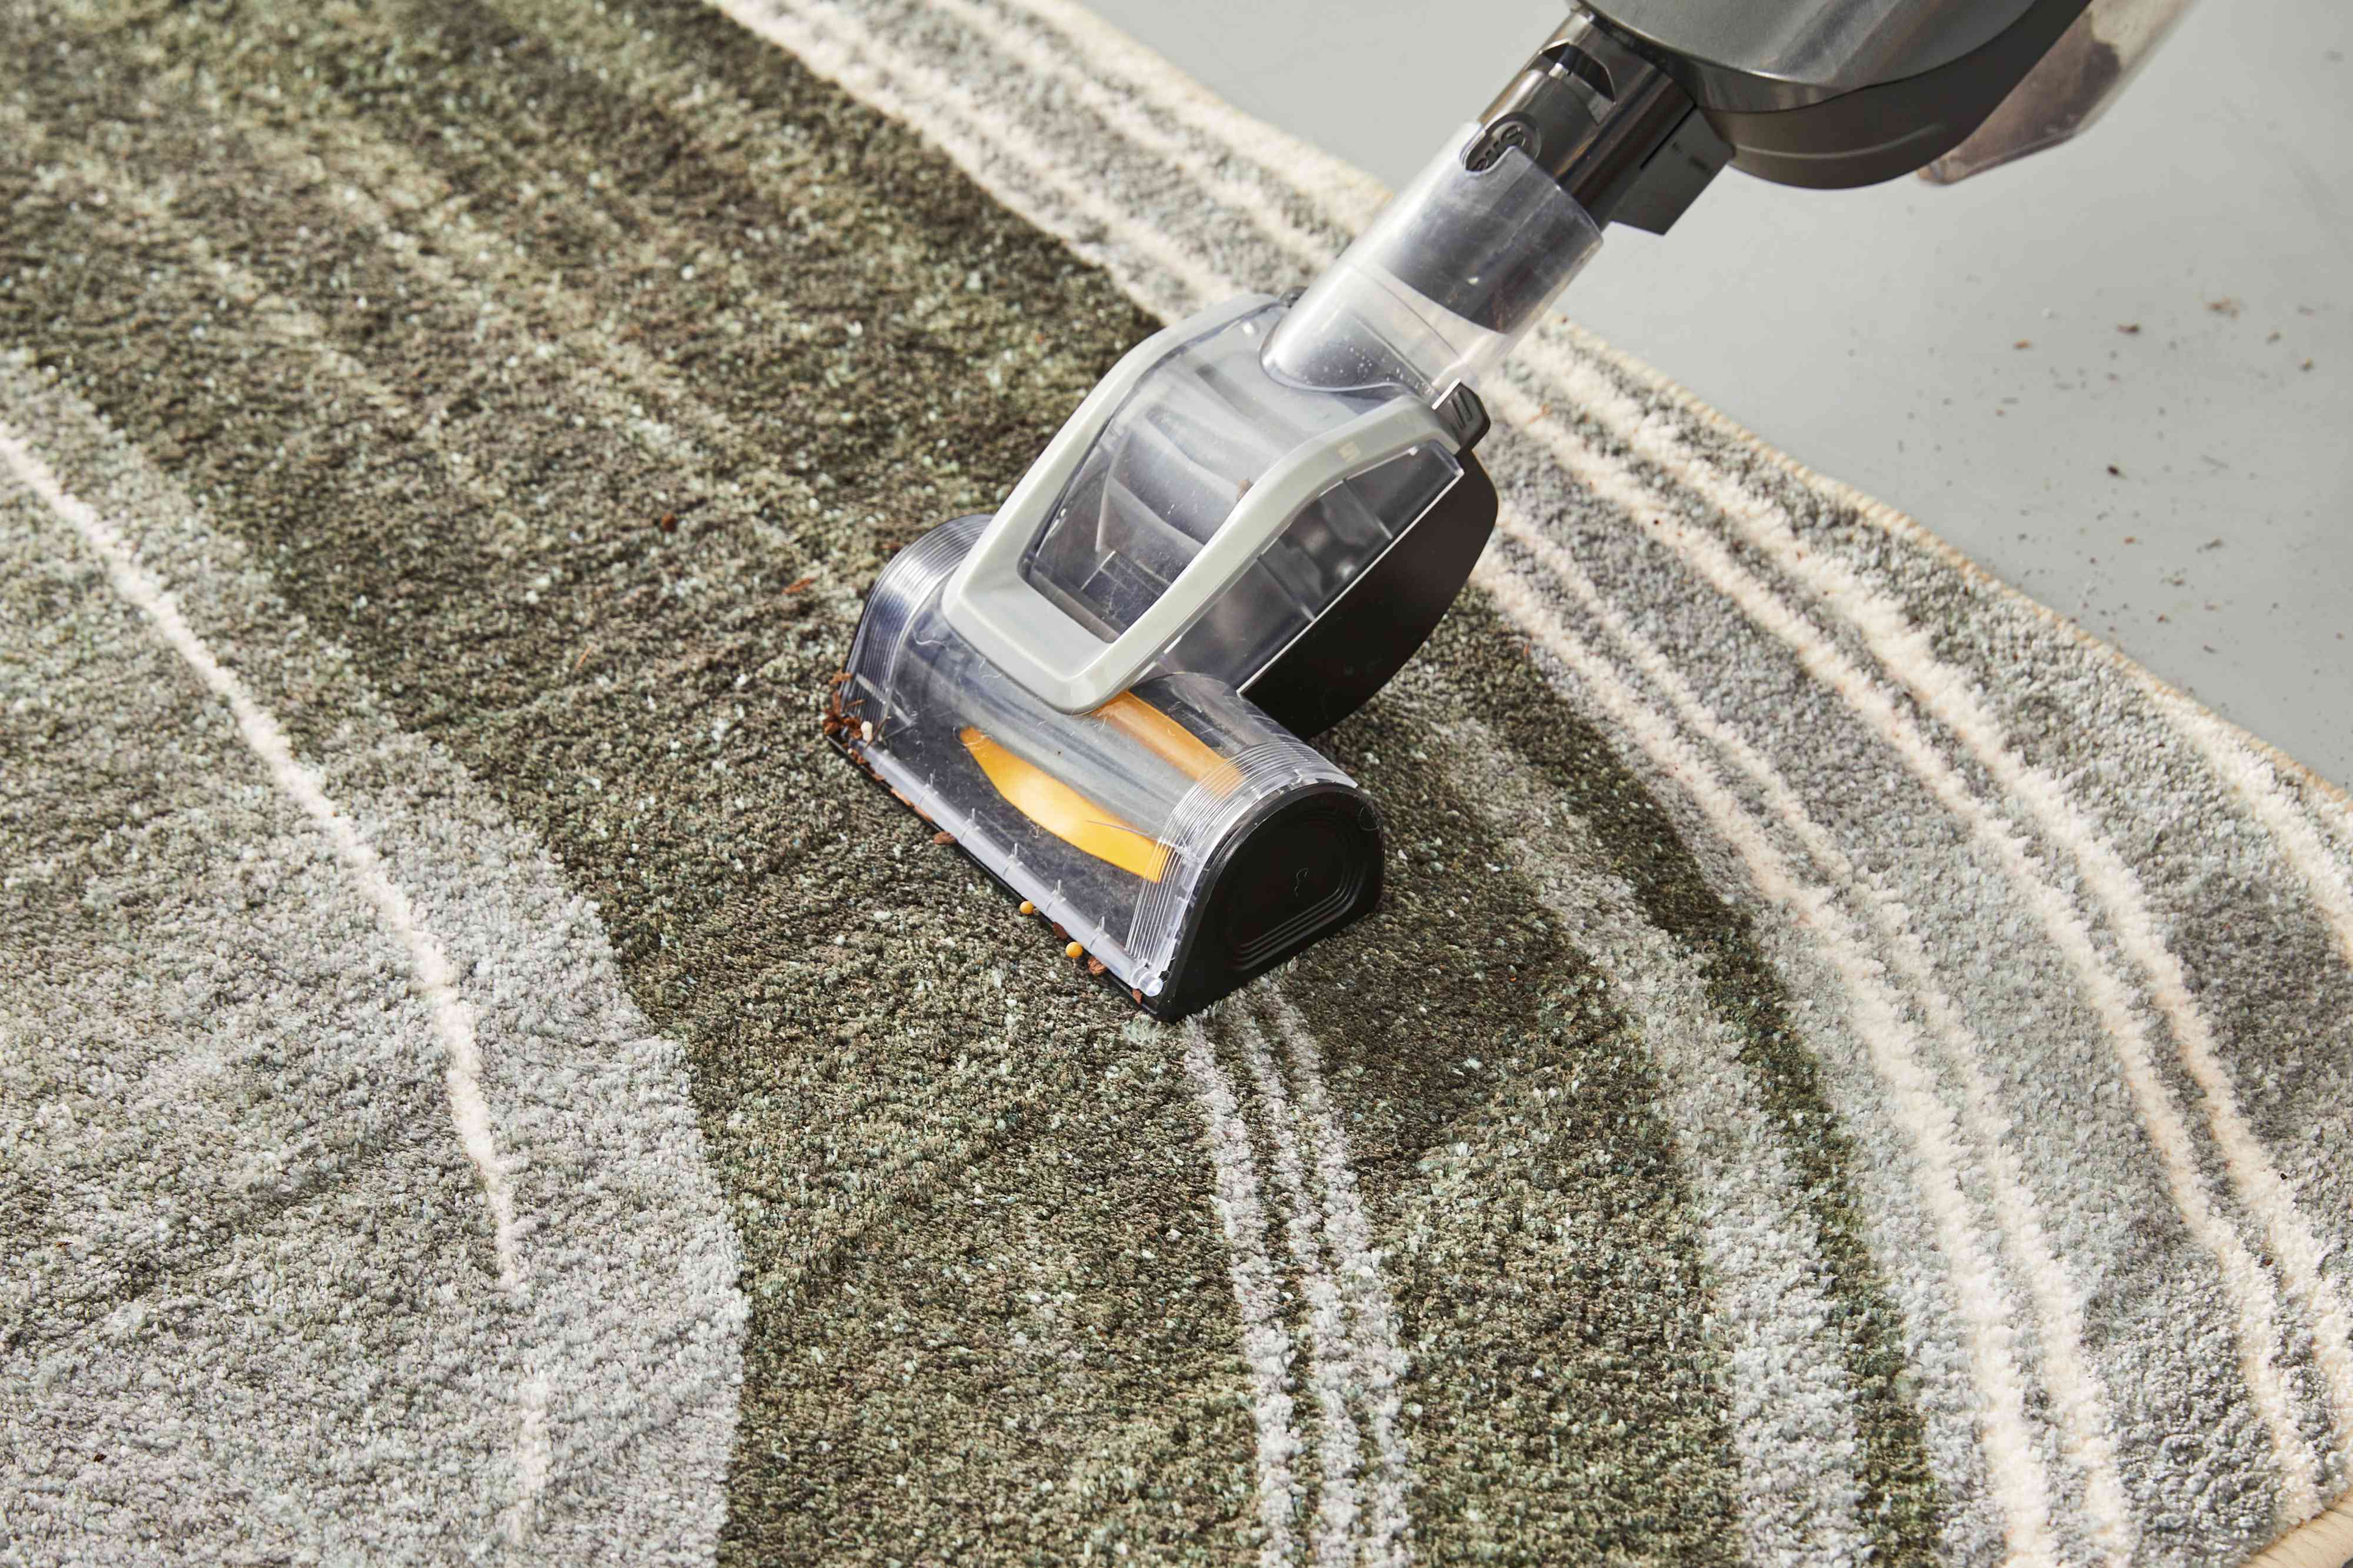 The West Elm Waterfall Washable Rug being vacuumed